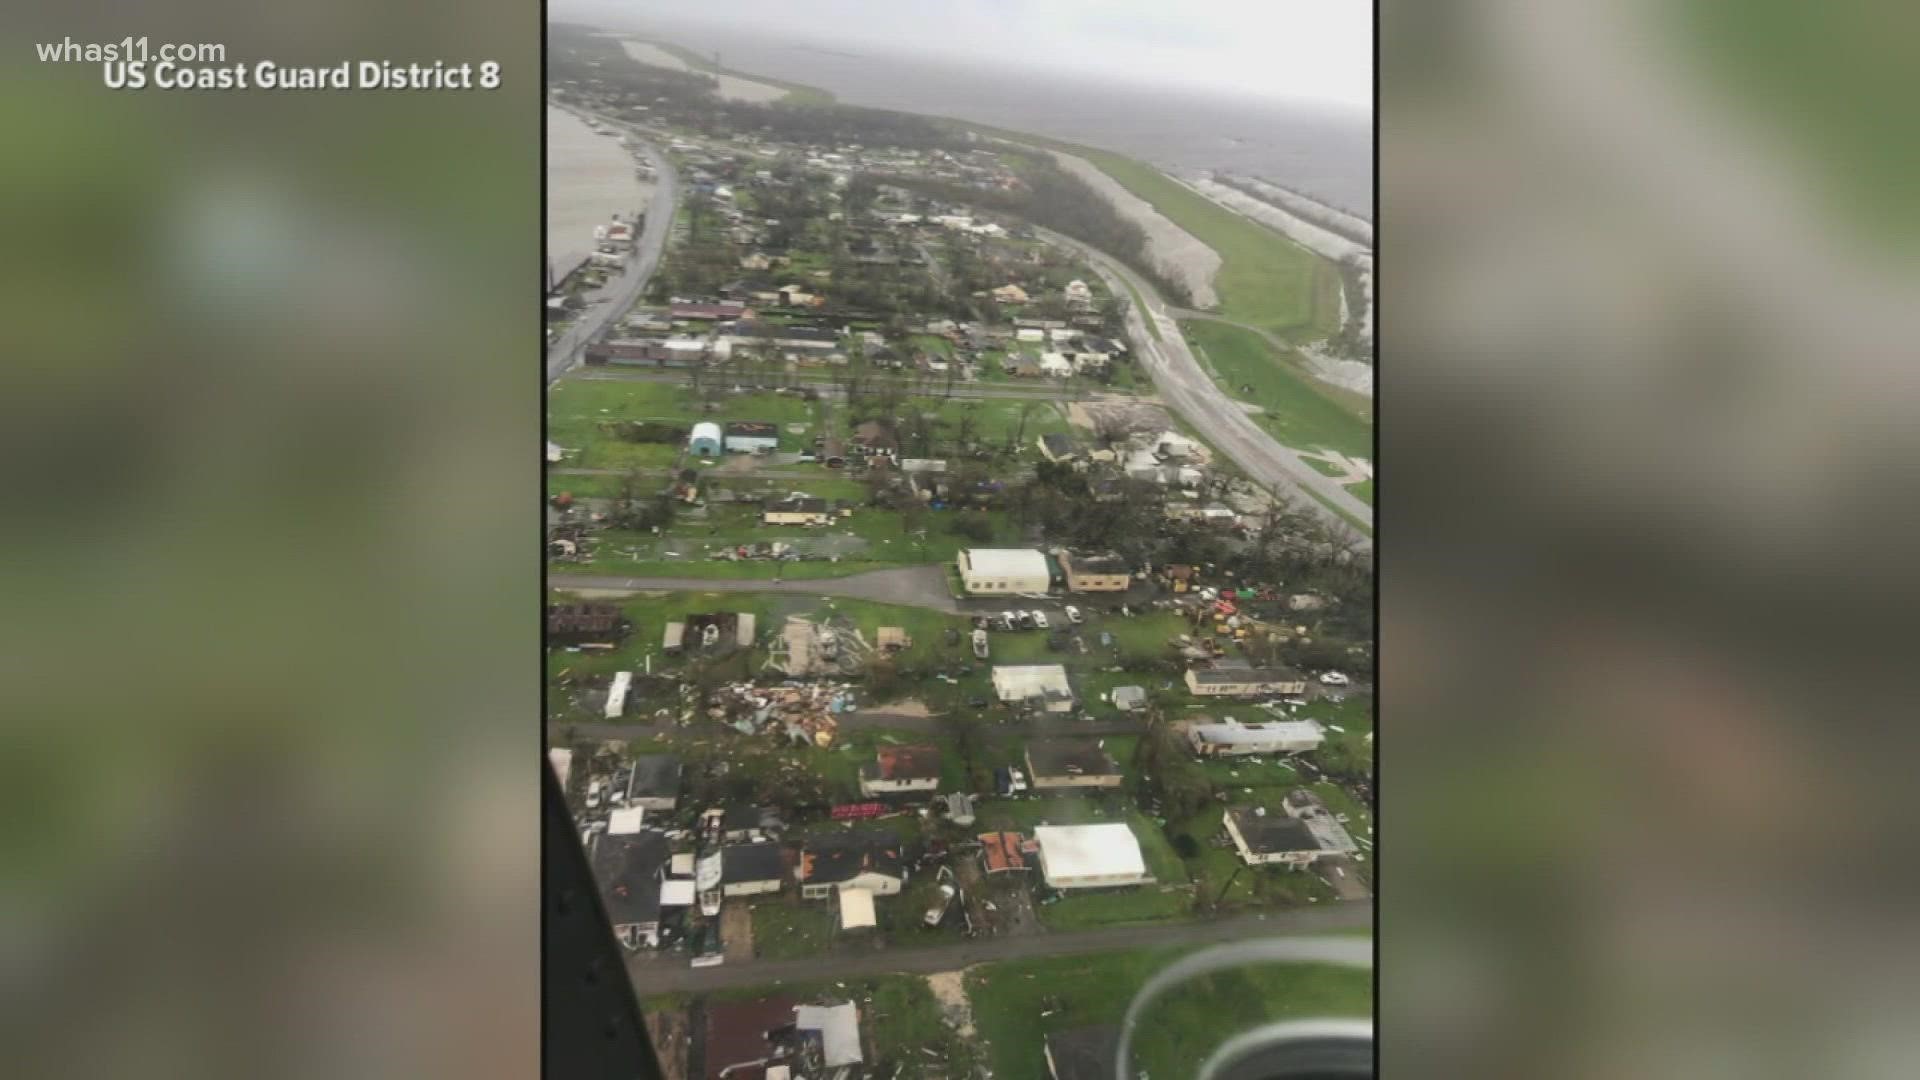 New Orleans authorities are able to get a better assessment of the damage, rescuers set to help people trapped by floodwaters.